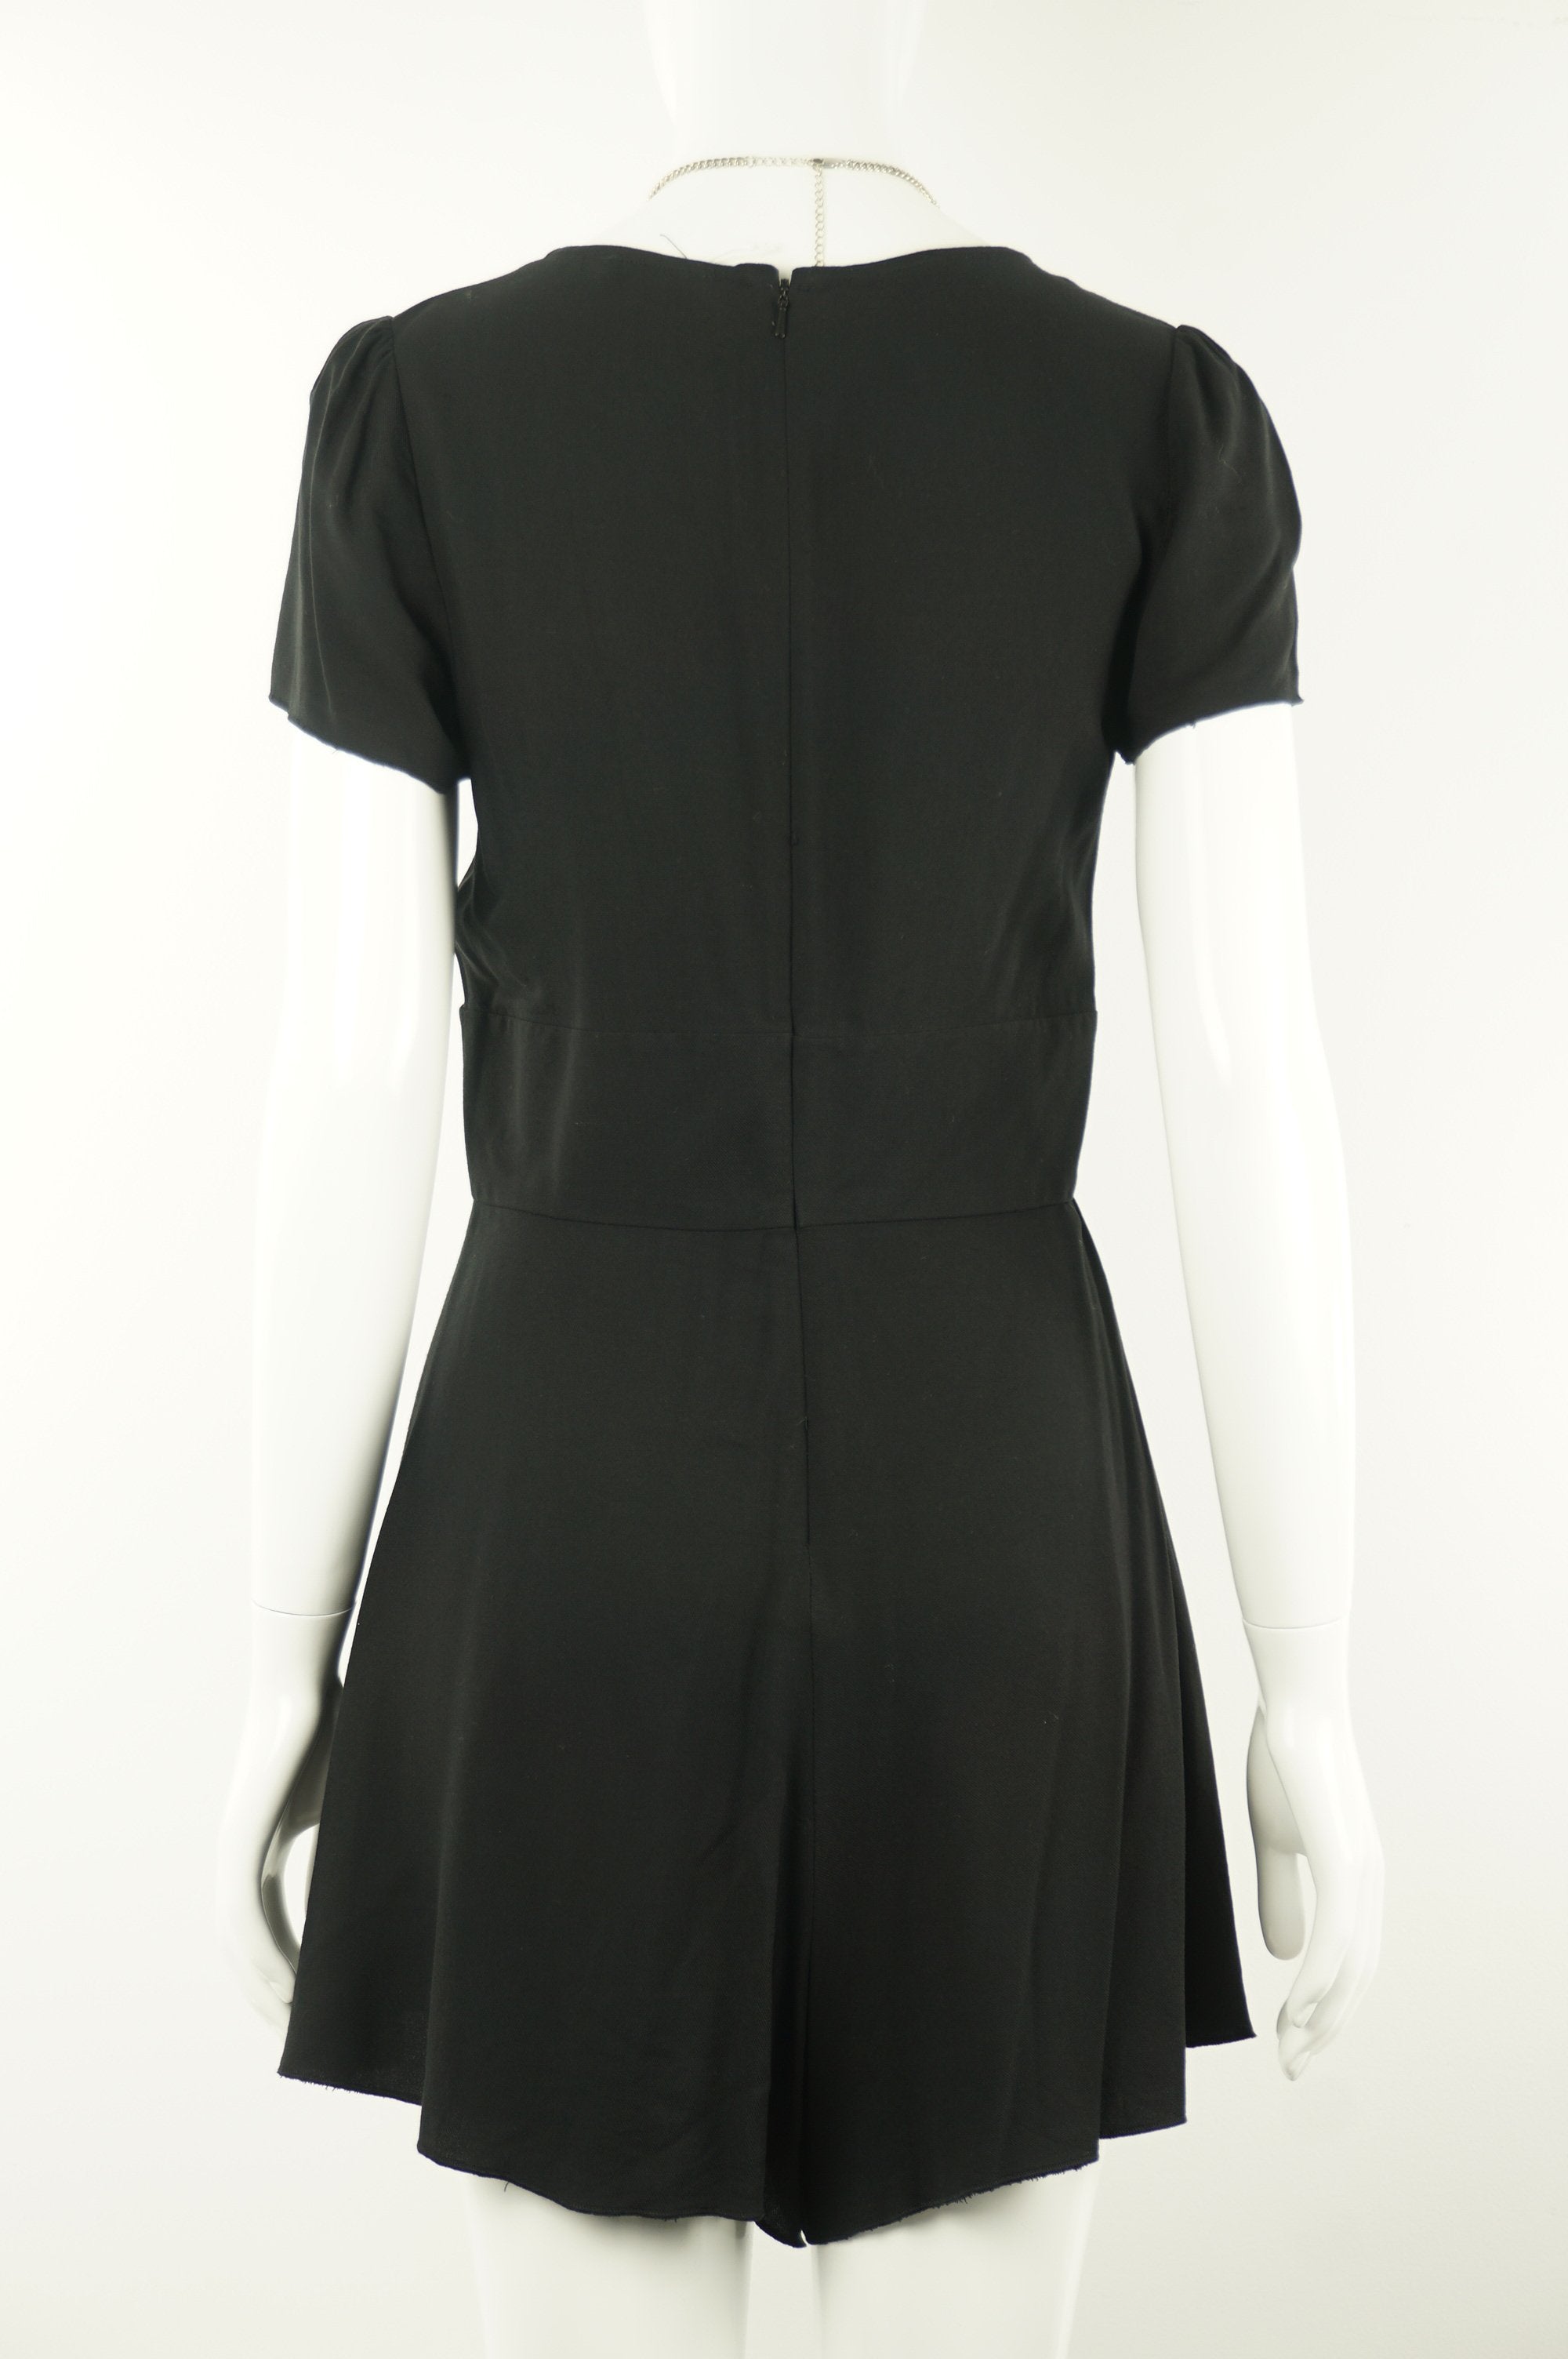 Talula Black Romper with Zipper in Back, The cutest black romper for casually strolling on a summer day., Black, 100% Rayon, women's Dresses & Skirts, women's Black Dresses & Skirts, Talula women's Dresses & Skirts, aritzia women's romper, women's black romper/jumpsuit